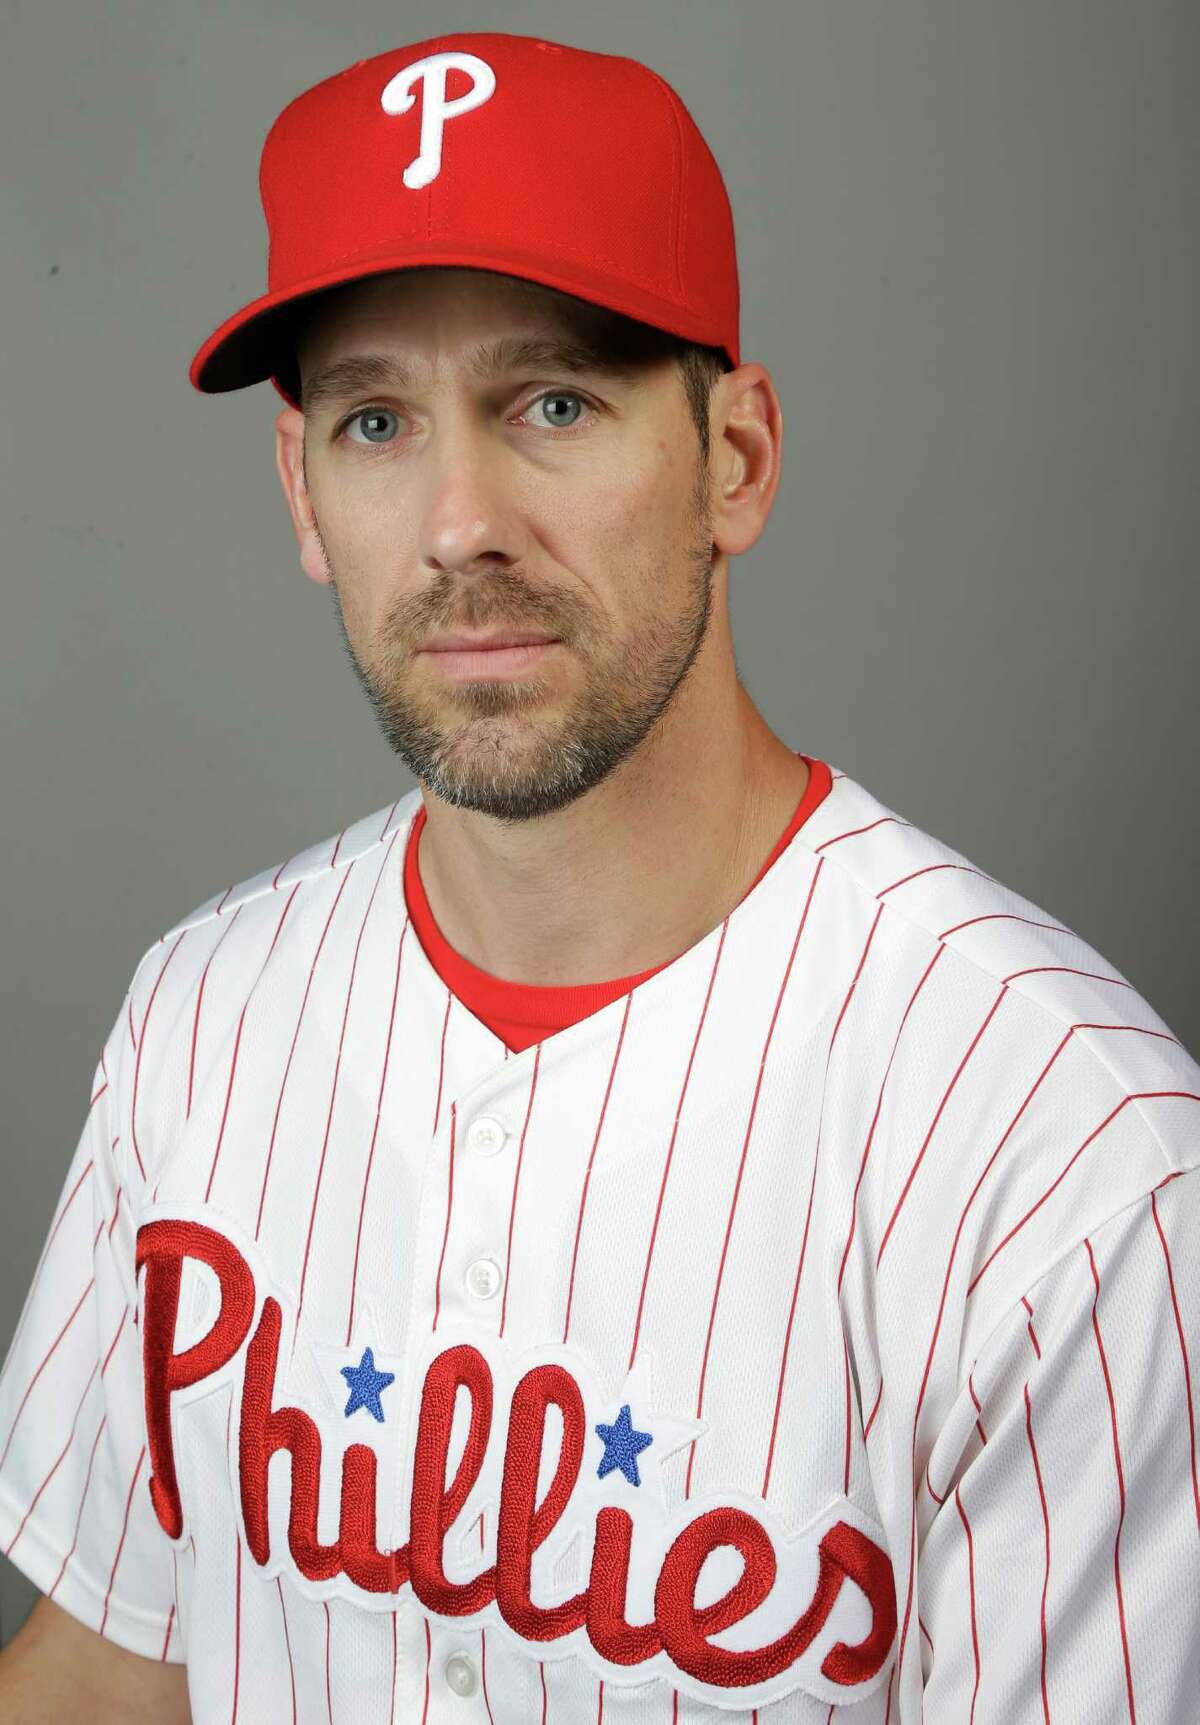 MLB: Phils' Lee faces possible career decision